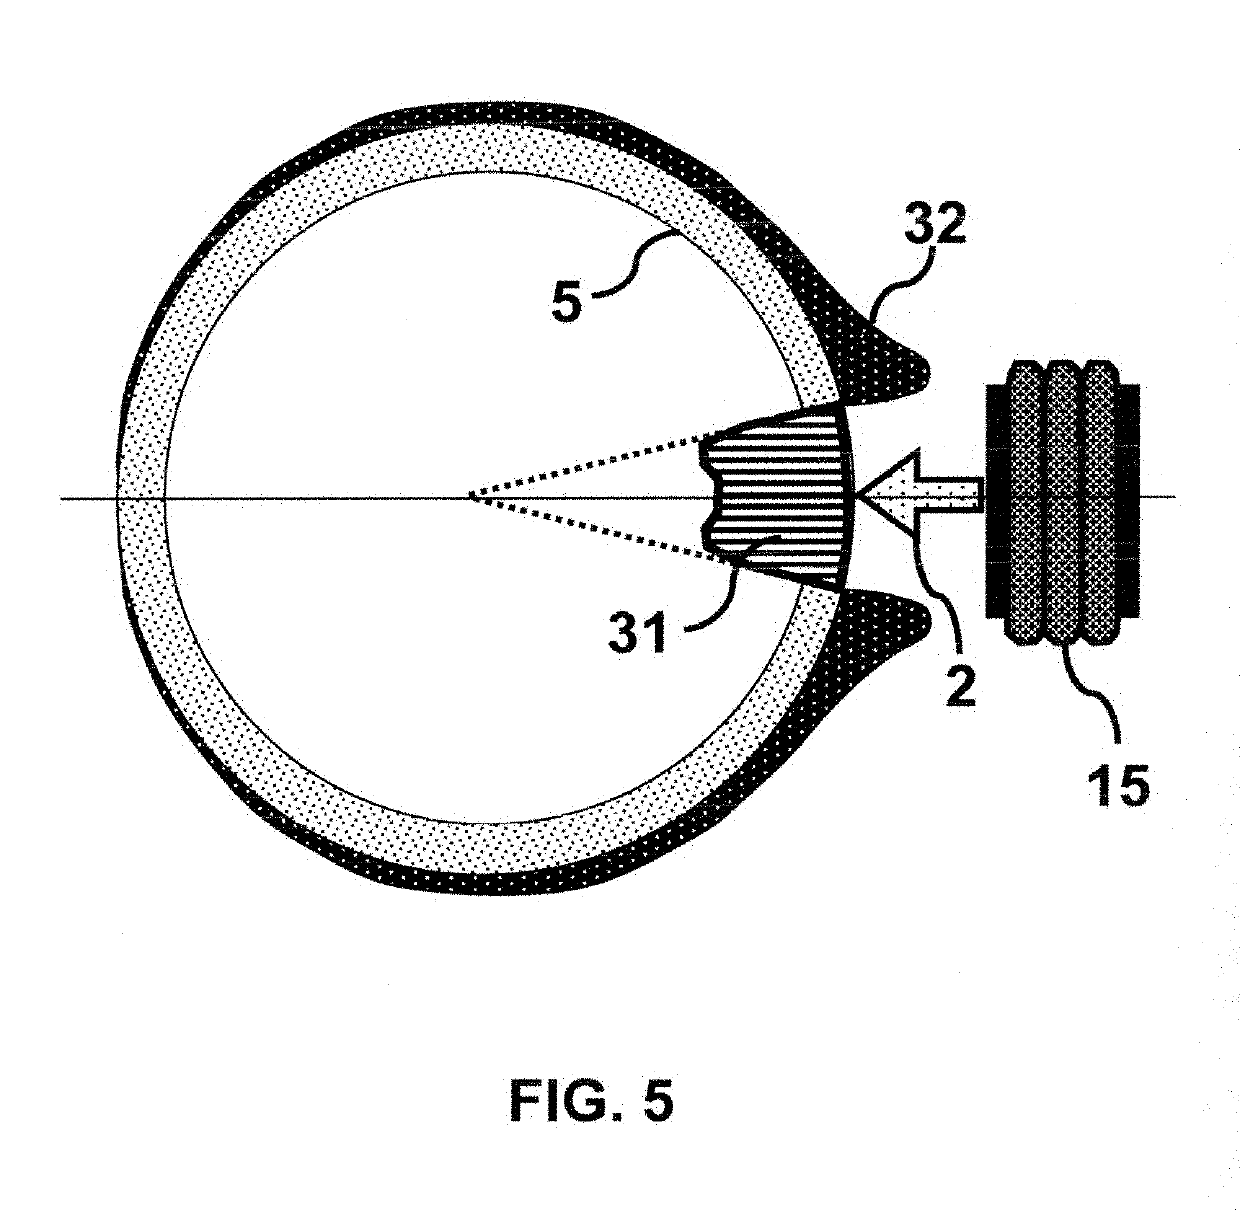 Segmented Current Magnetic Field Propulsion System